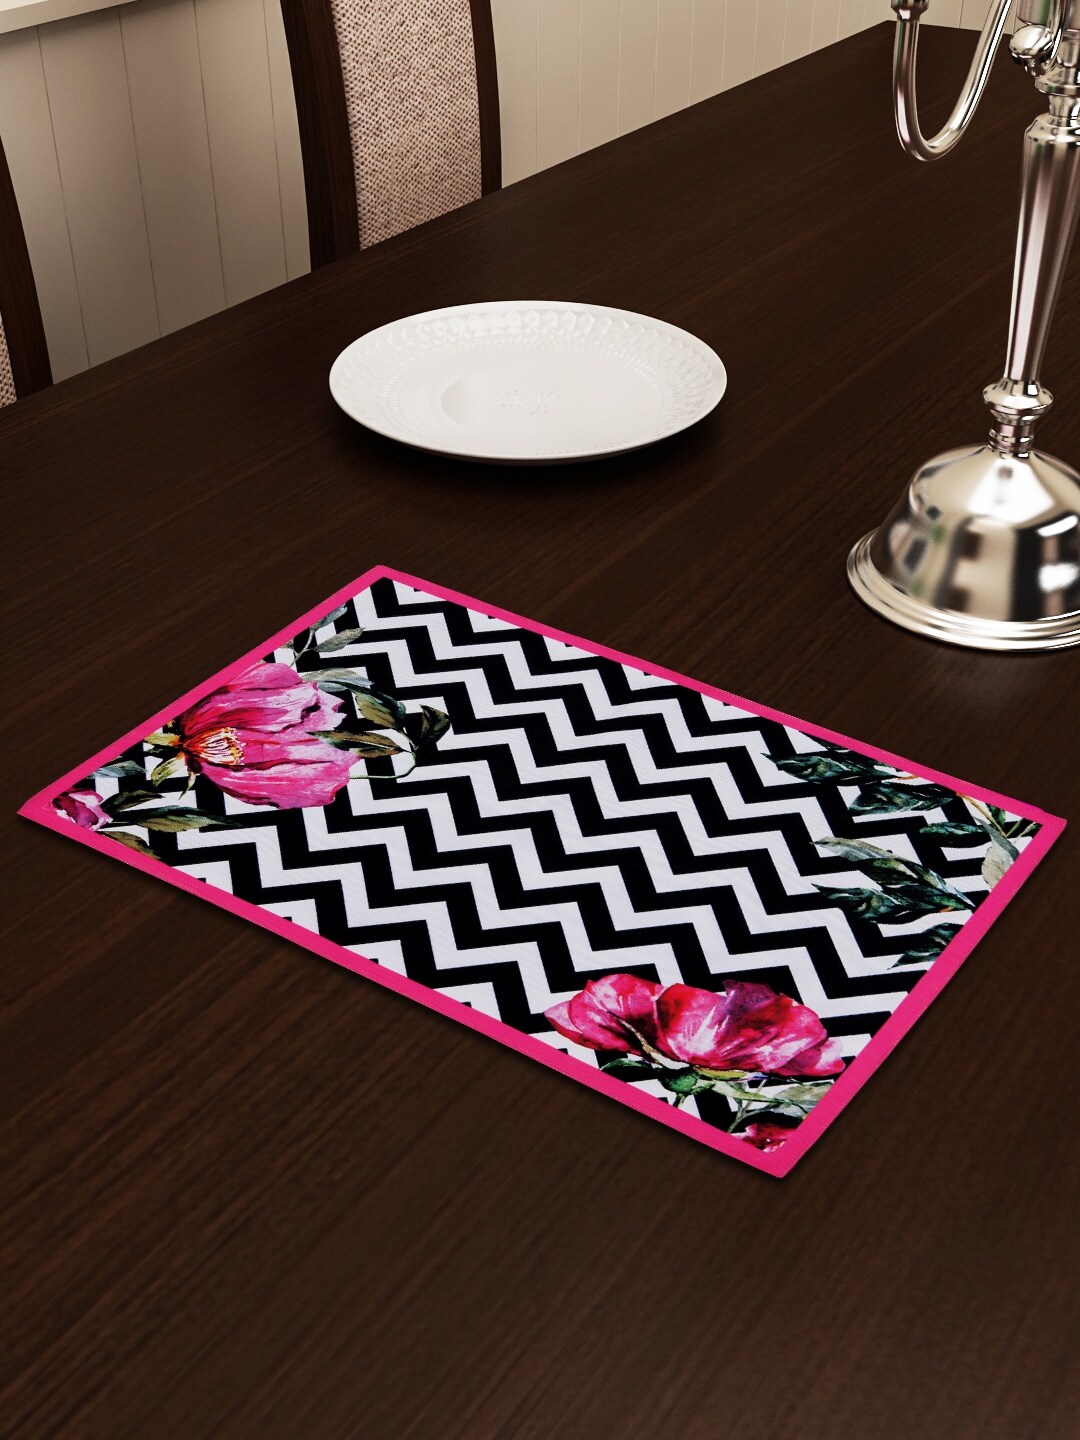 SEJ by Nisha Gupta Black & White Printed Table Placemat Price in India